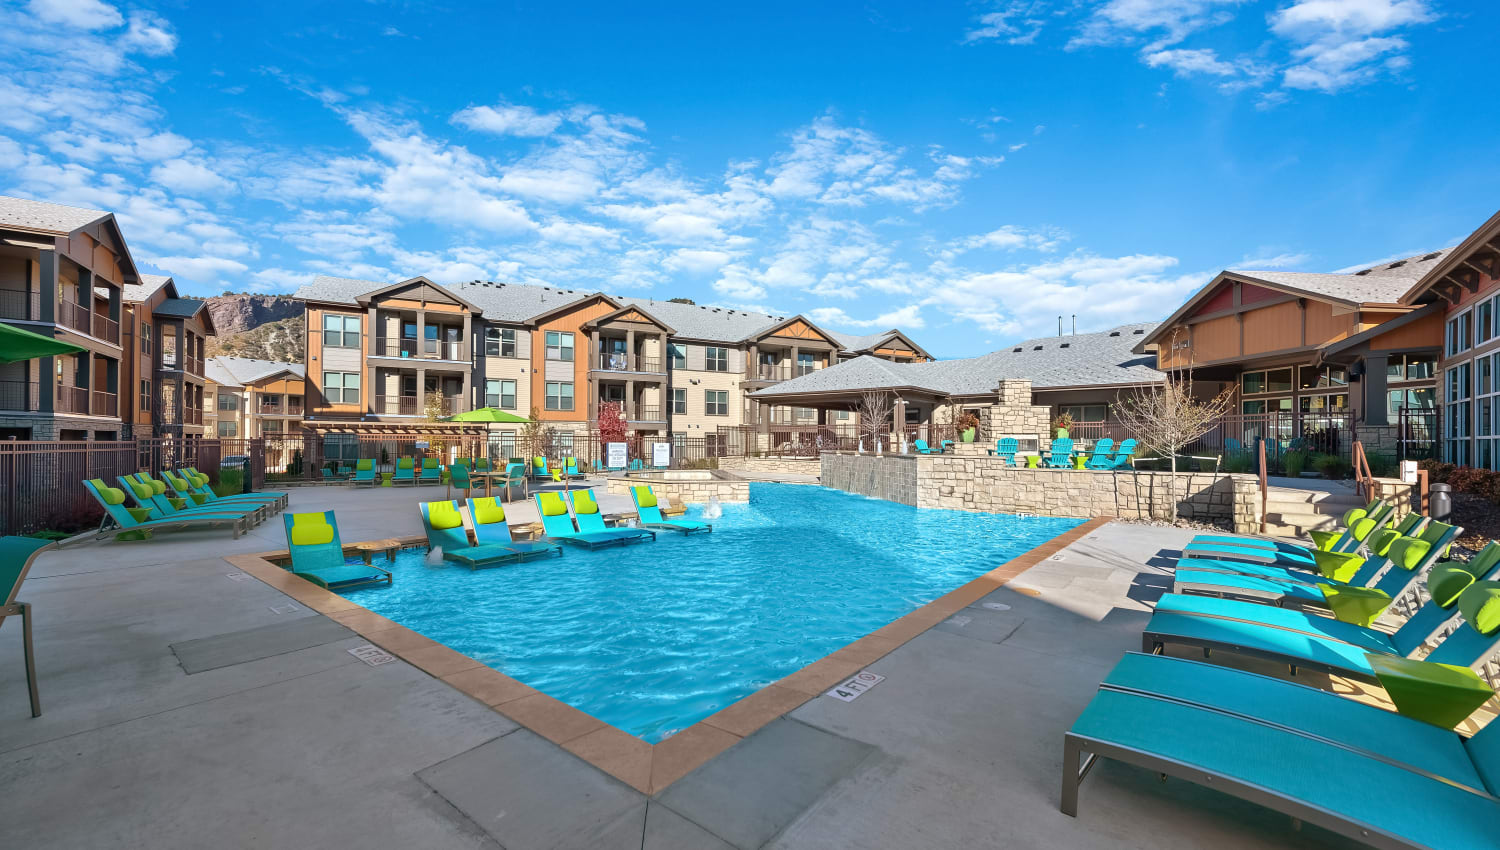 Beautiful pool with fountains at Rocket Pointe in Durango, Colorado